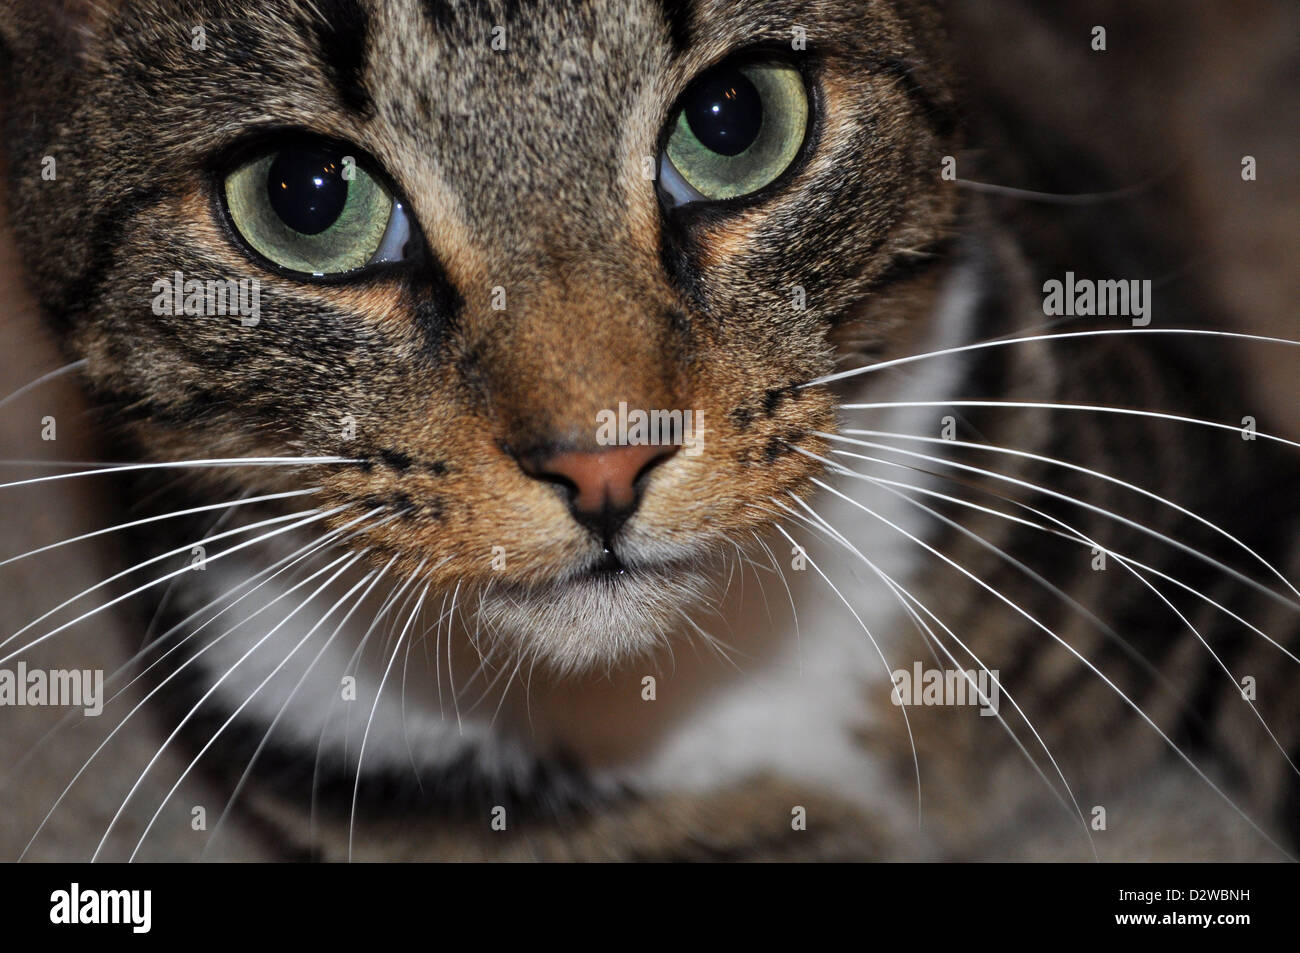 Tabby Cat Face with Big Green Eyes and Long White Whiskers Stock Photo